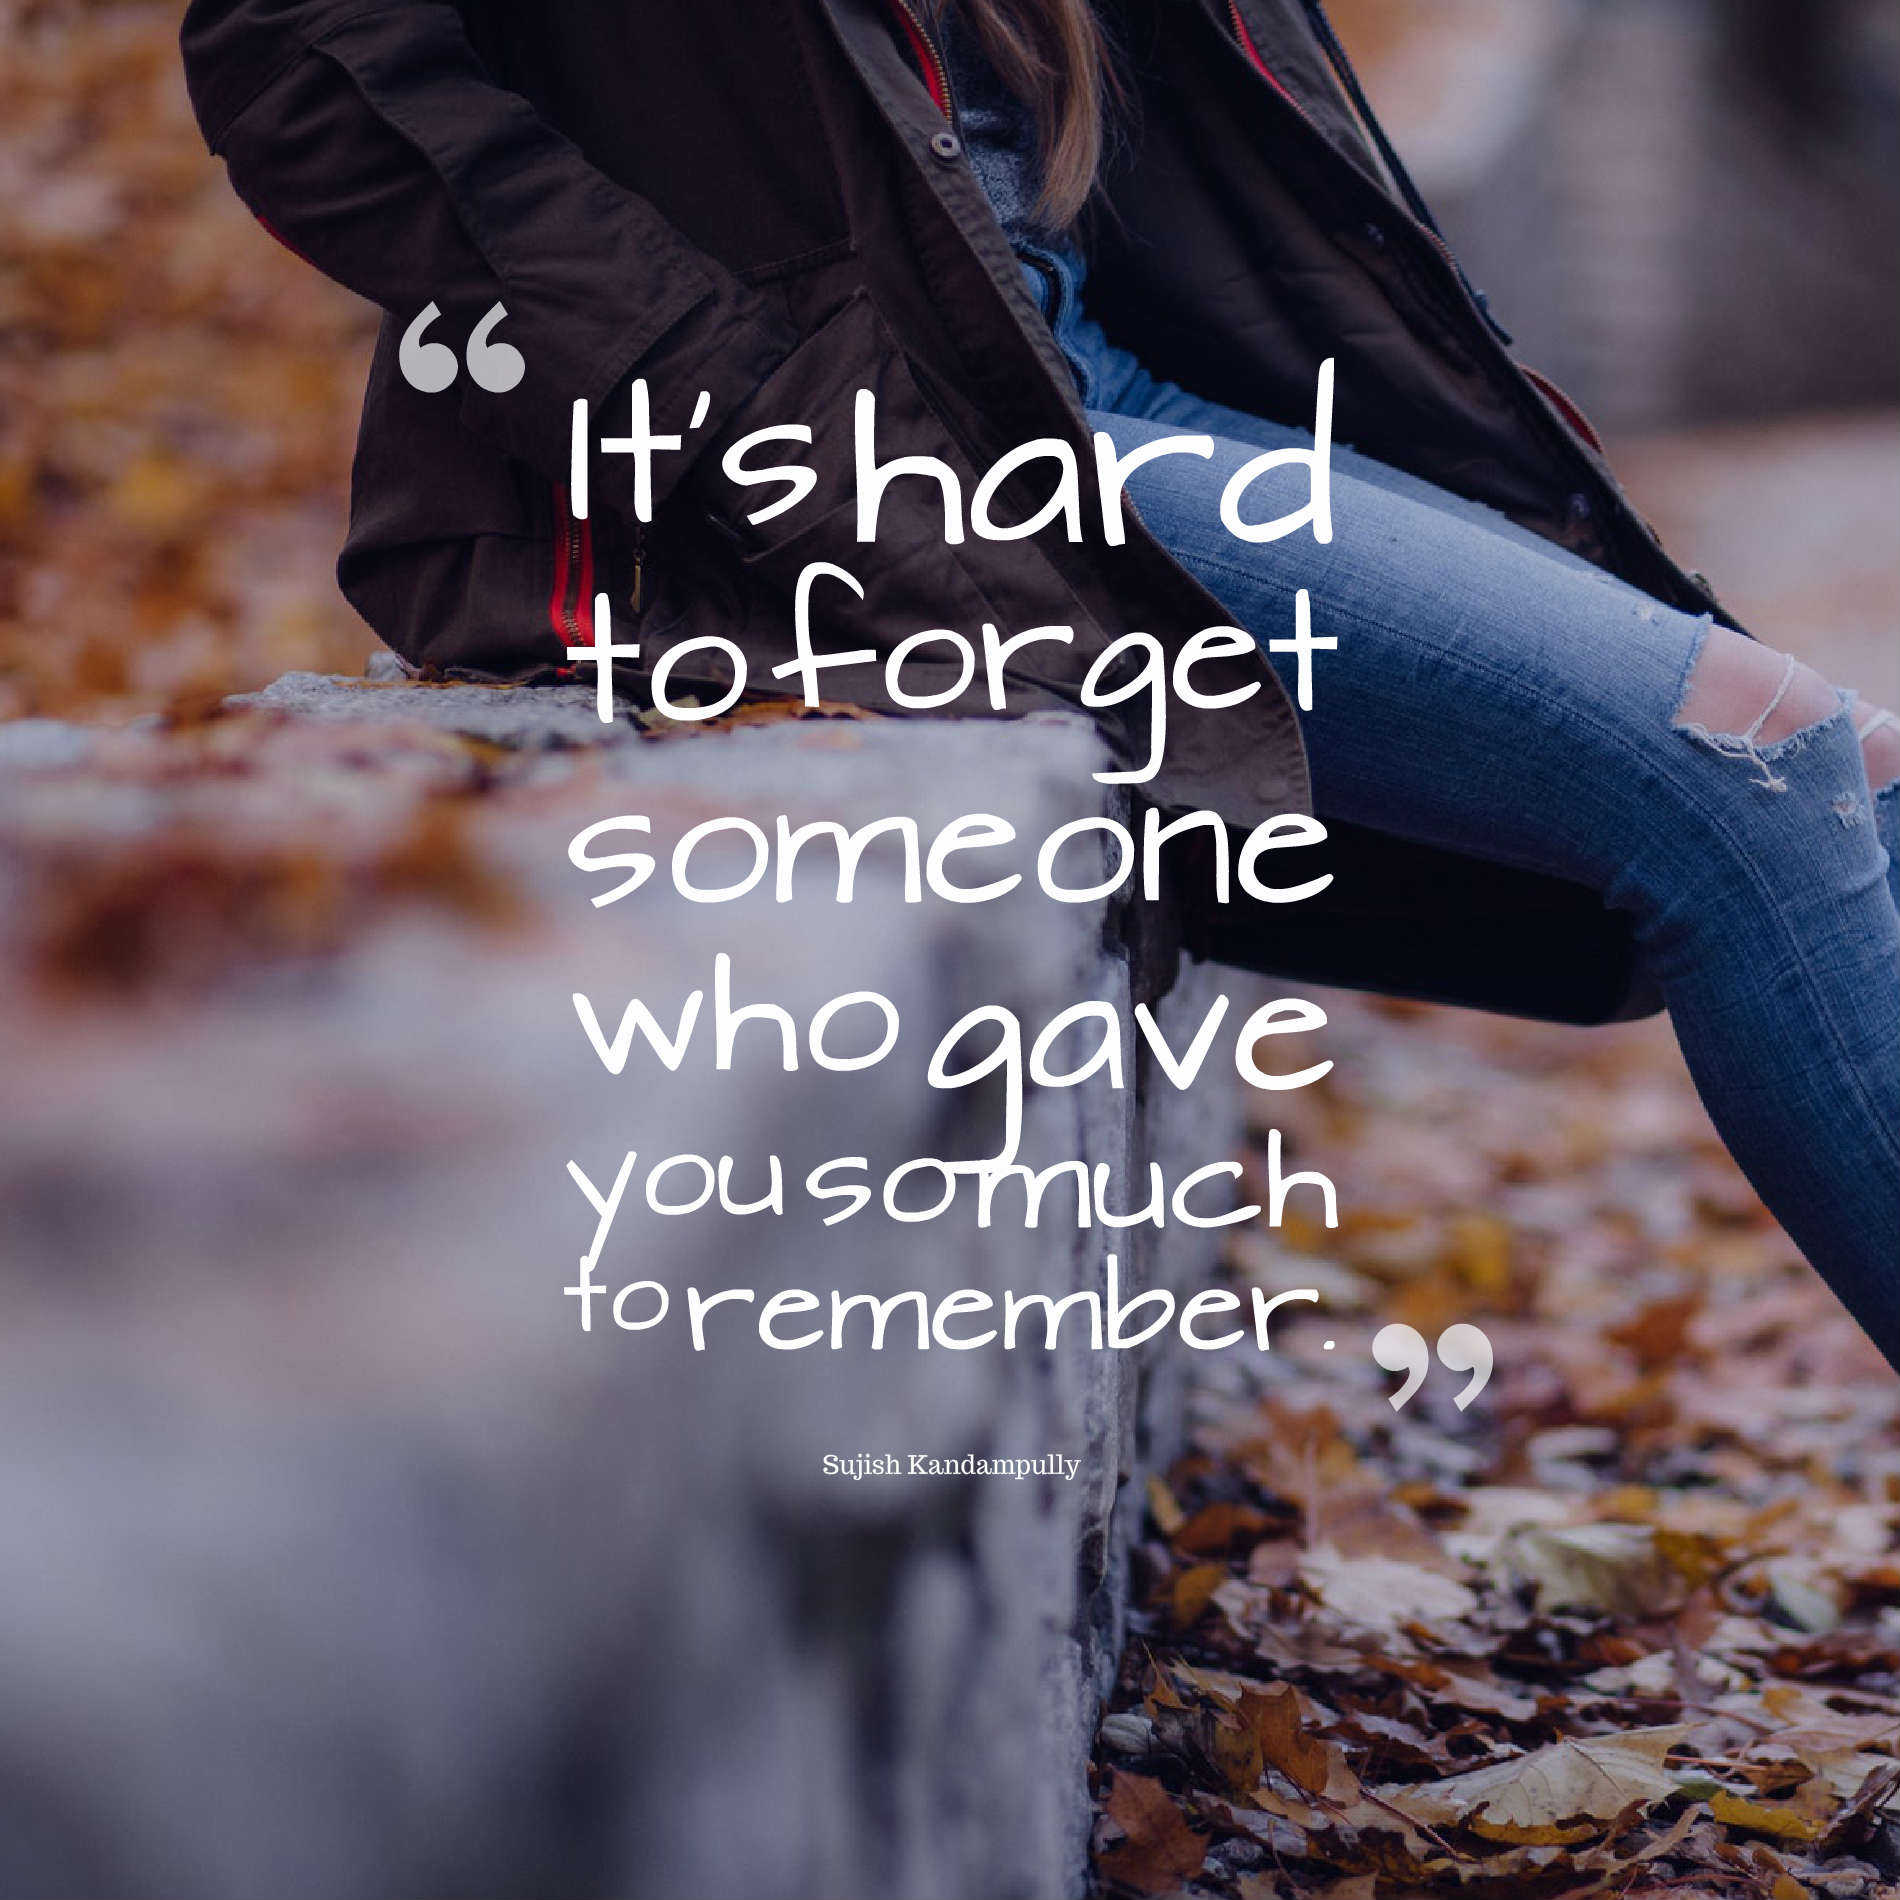 It’s hard to forget someone who gave you so much to remember.